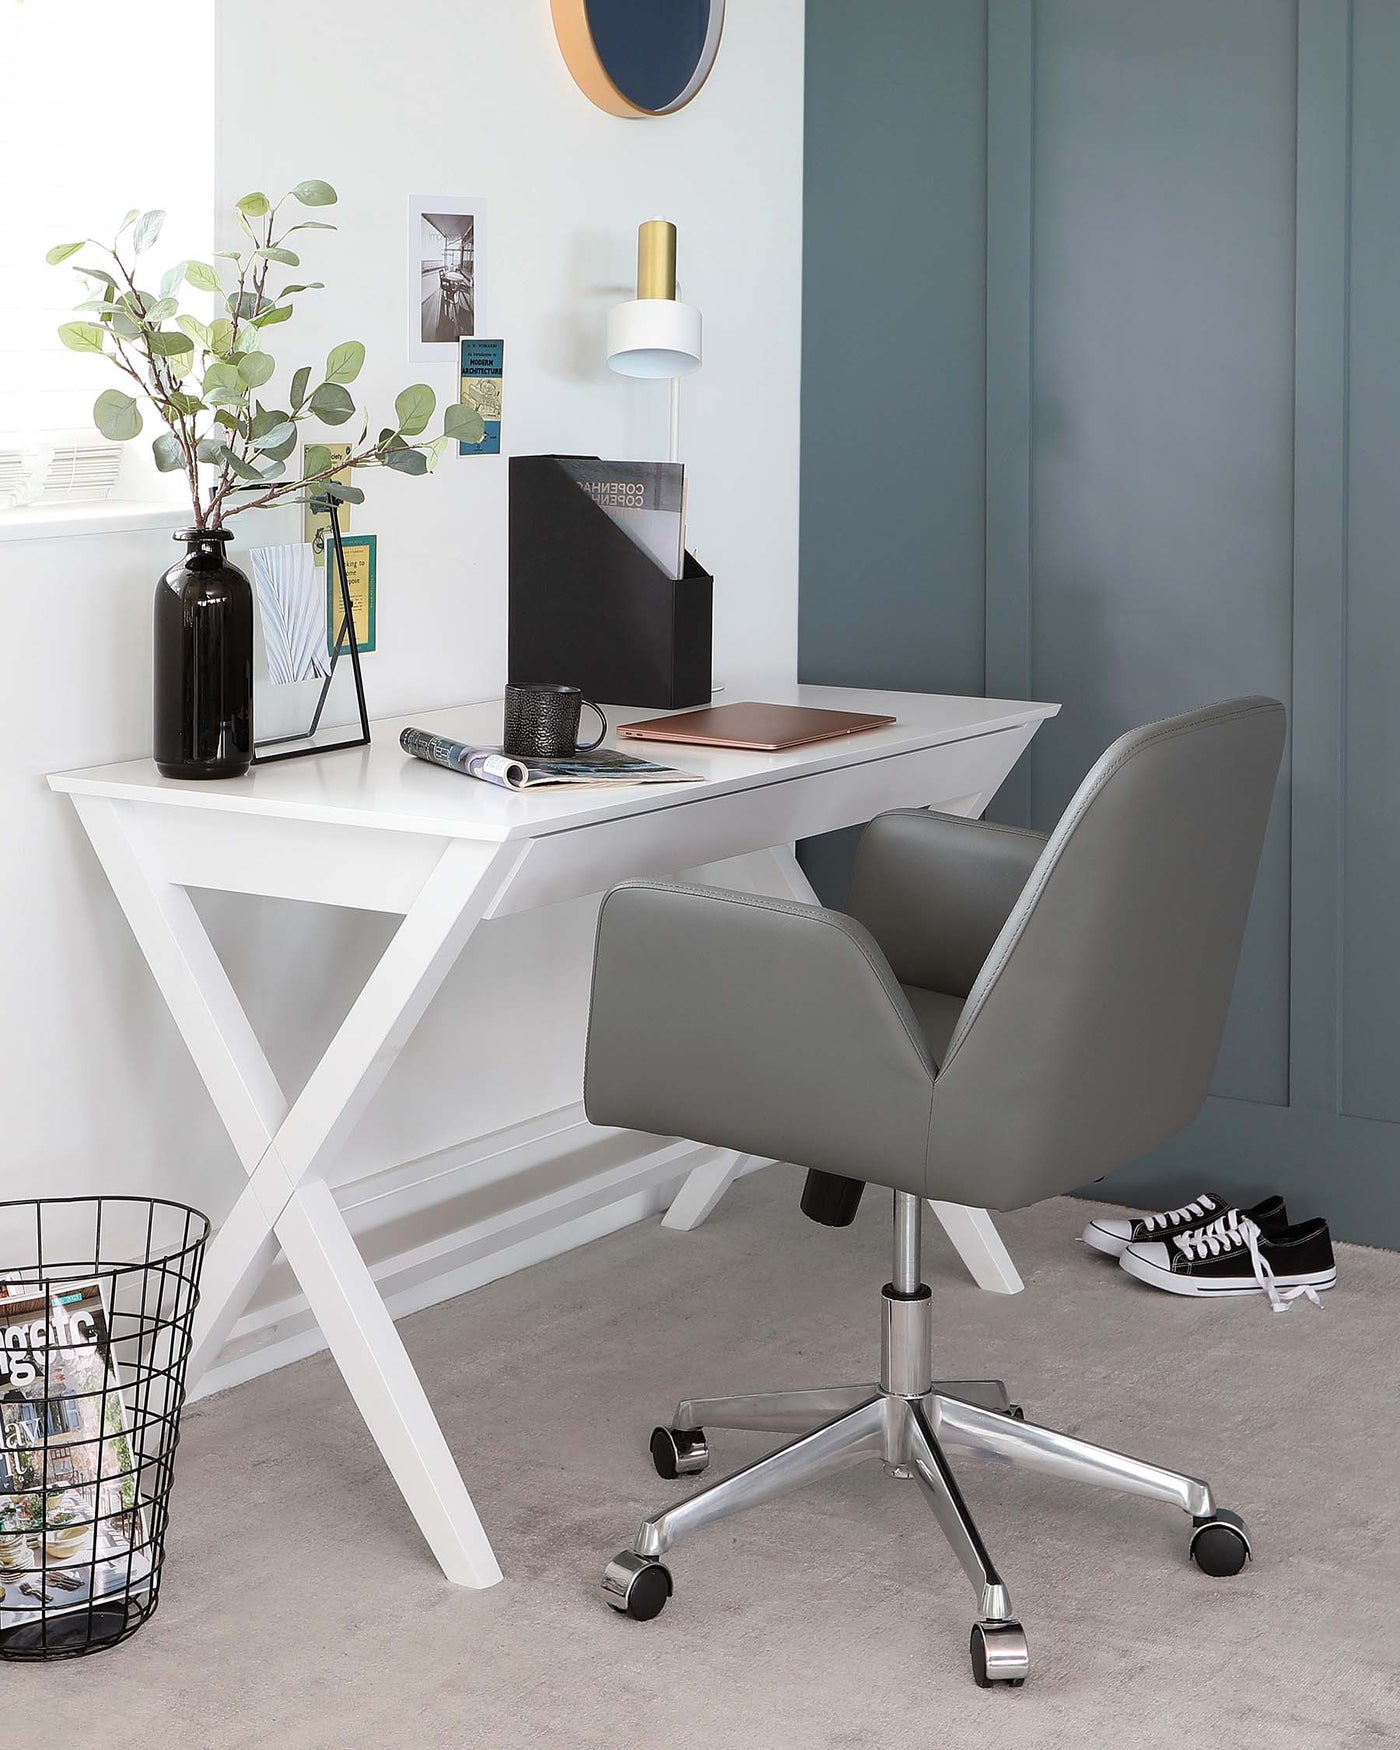 A modern home office setup featuring a sleek, white crisscross-legged desk paired with a sophisticated grey upholstered swivel chair with a high backrest and stainless steel base on casters.